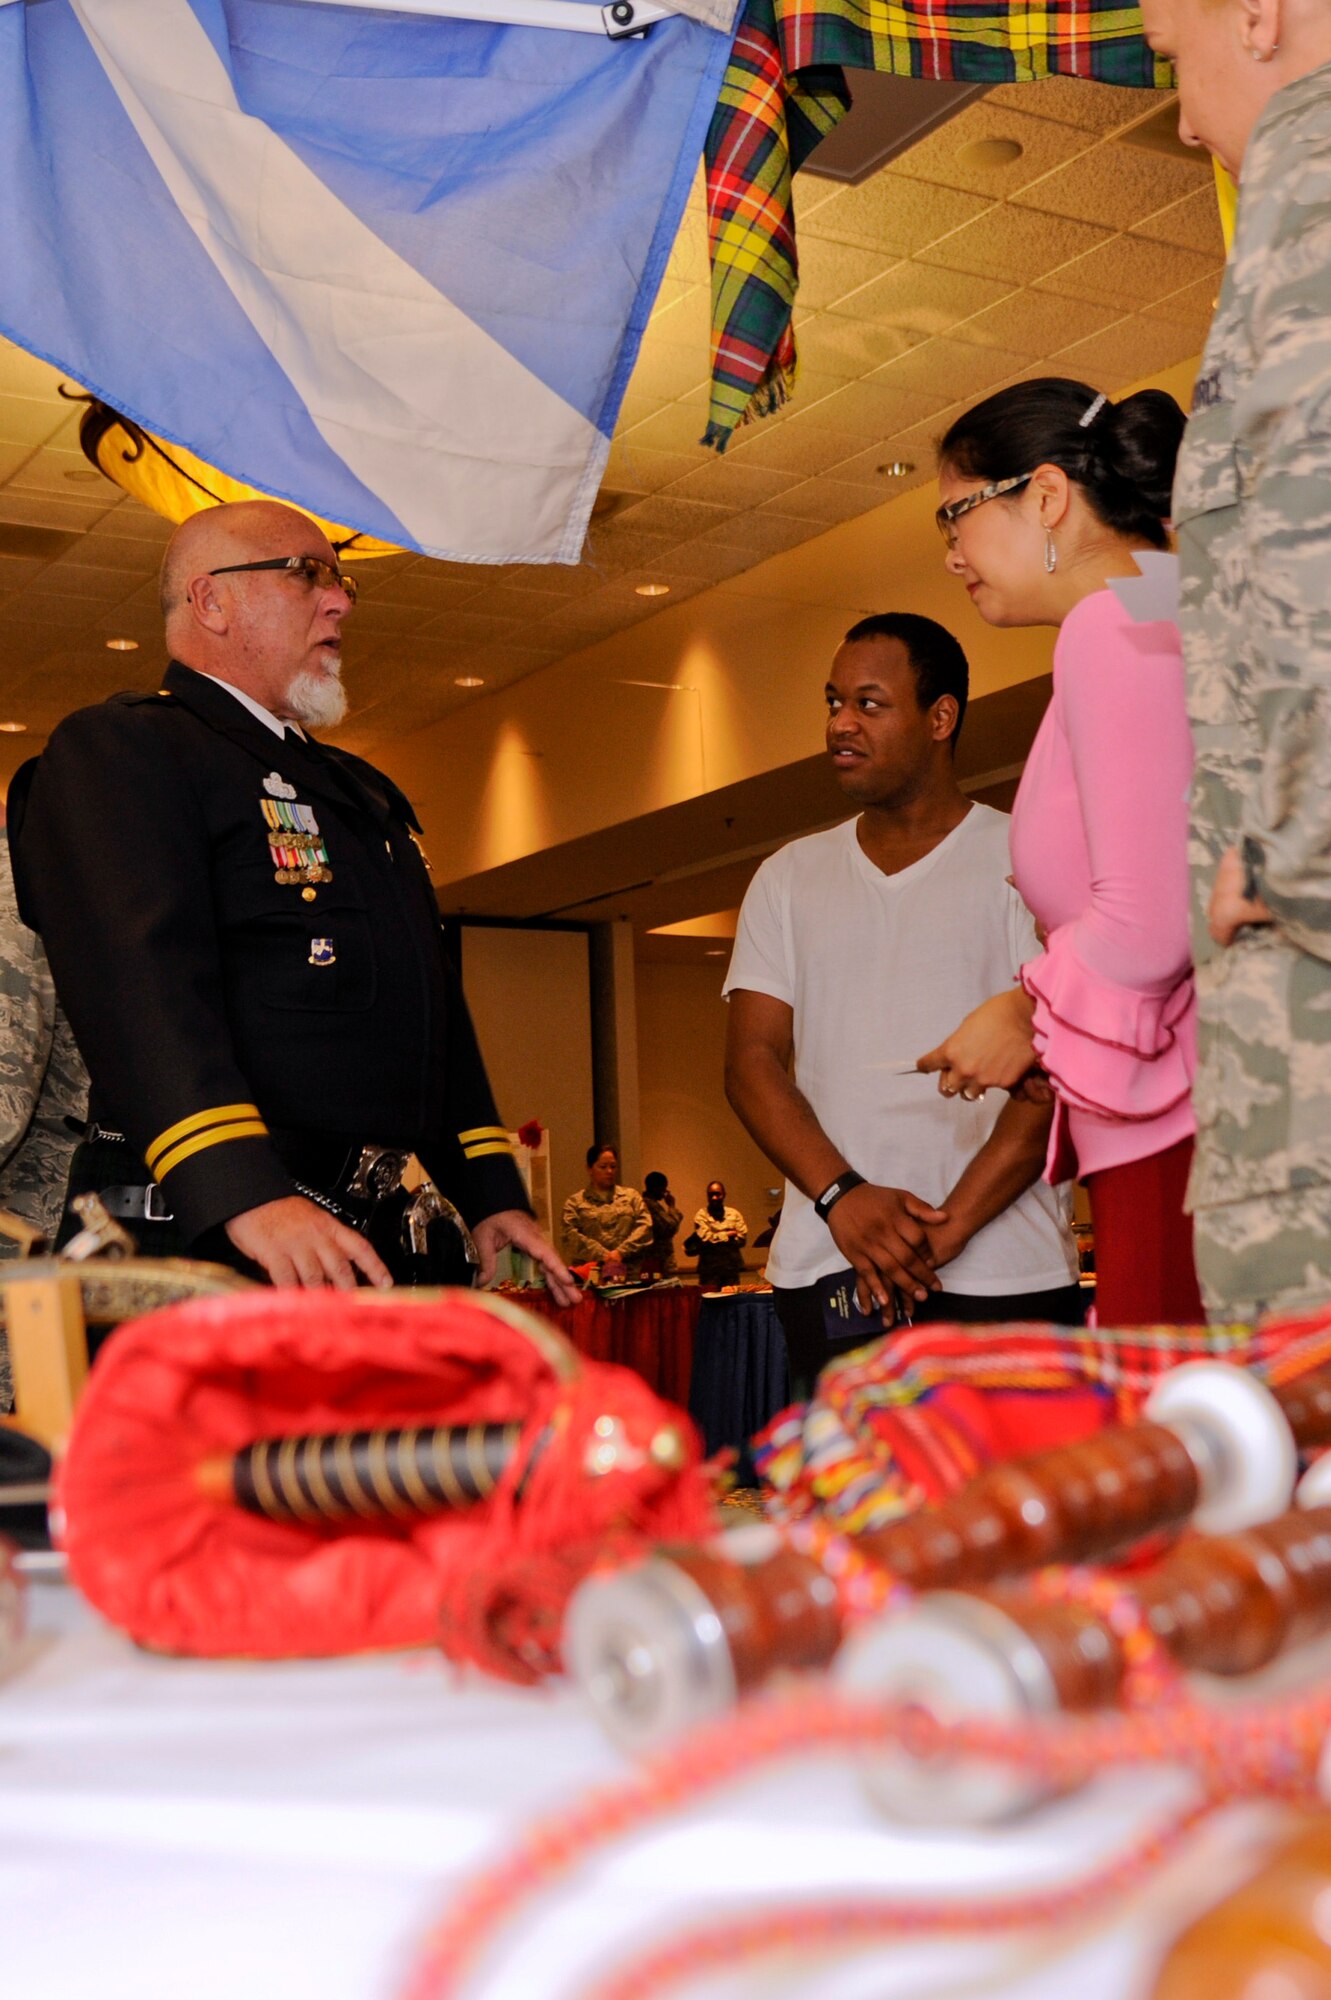 VANDENBERG AIR FORCE BASE, Calif. – Rickie Gable, 30th Space Wing anti-terrorism director, speaks about the Scottish culture at the Scotland booth during this year’s annual Cultural Diversity Day at the Pacific Coast Club here Wednesday, Aug. 21, 2013. Vandenberg’s Diversity Day combined all annual cultural observances into one gala event of food, music, dance and displays. (U.S. Air Force photo/Senior Airman Lael Huss)